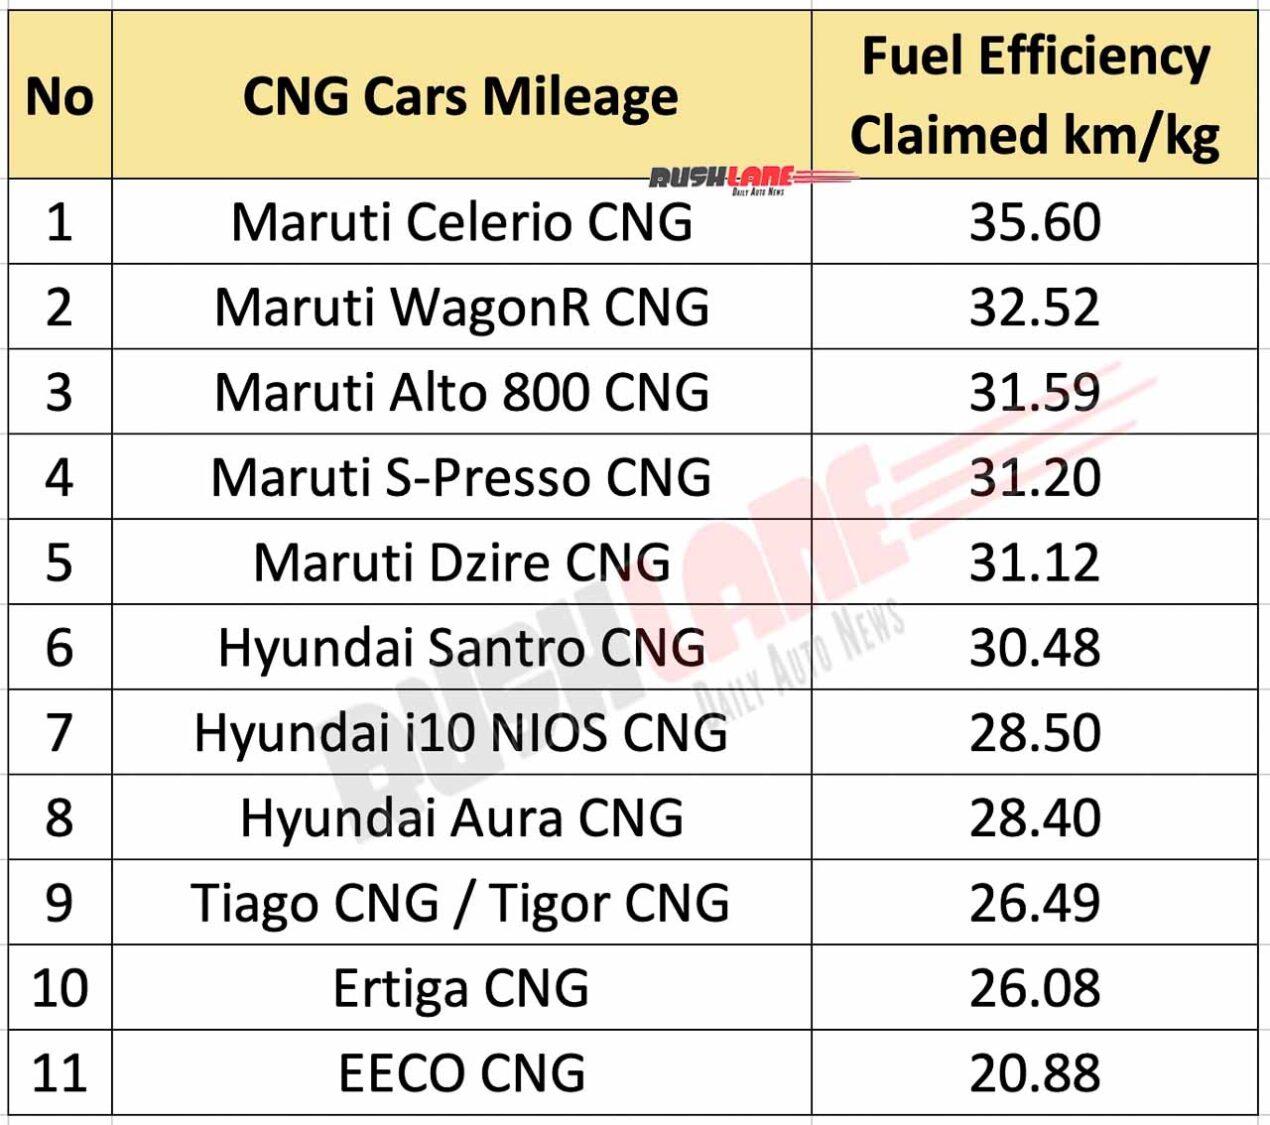 Top 10 CNG Cars Mileage